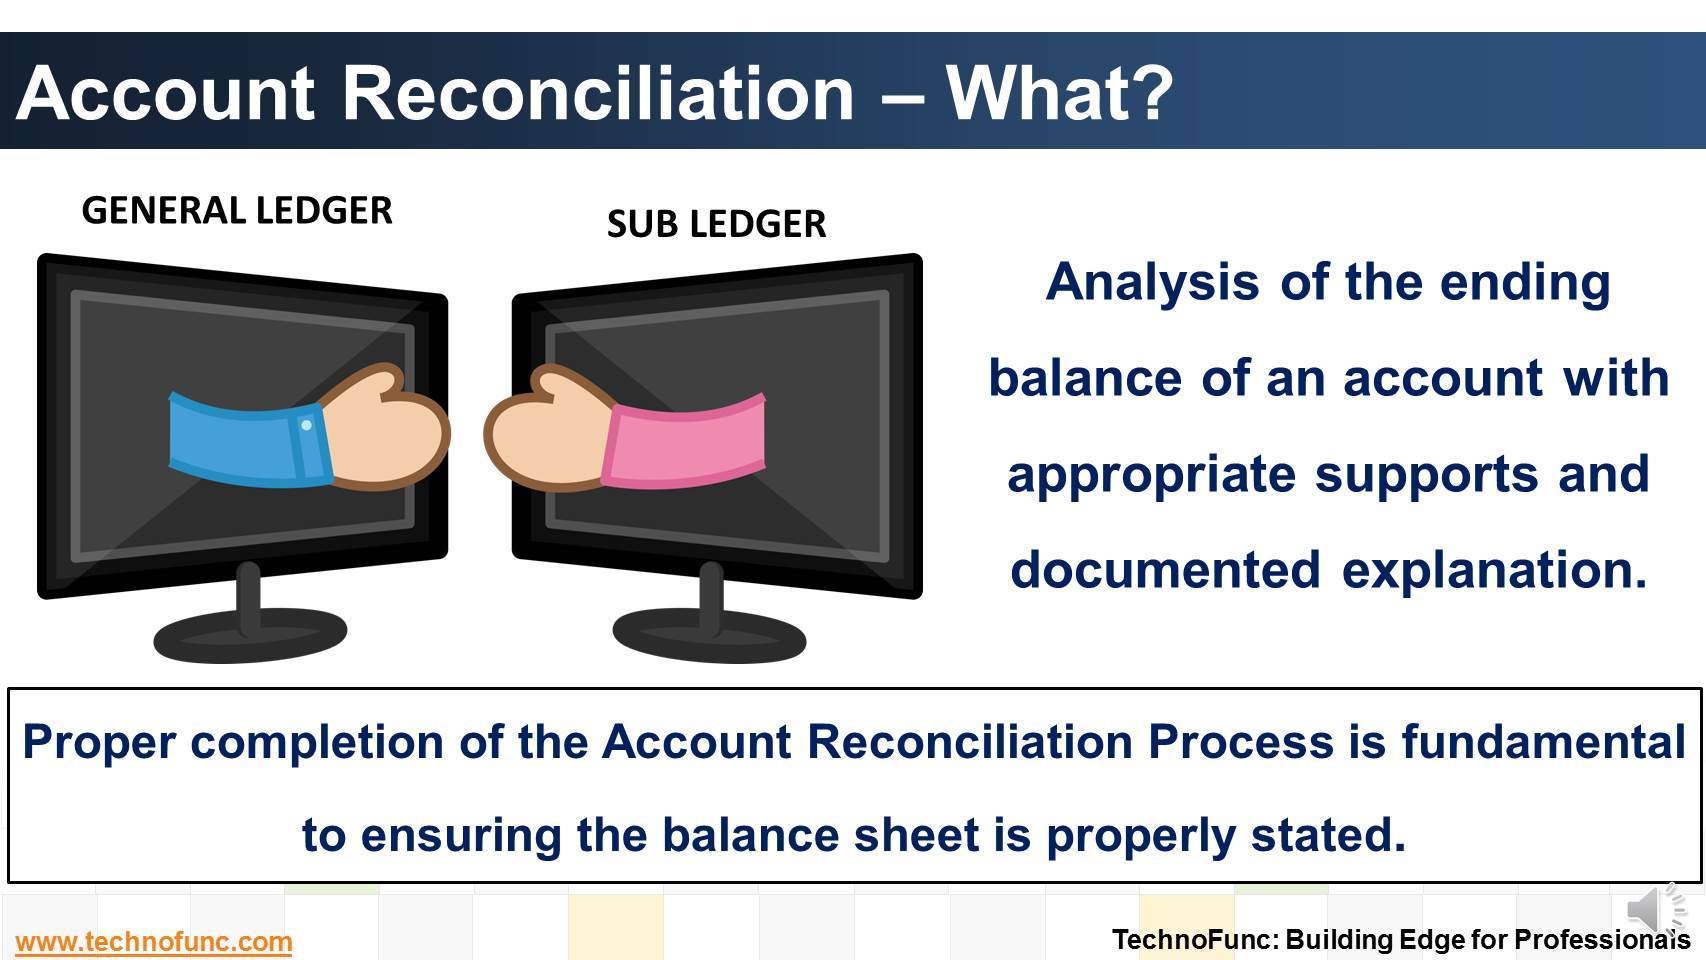 What is Account Reconciliation?